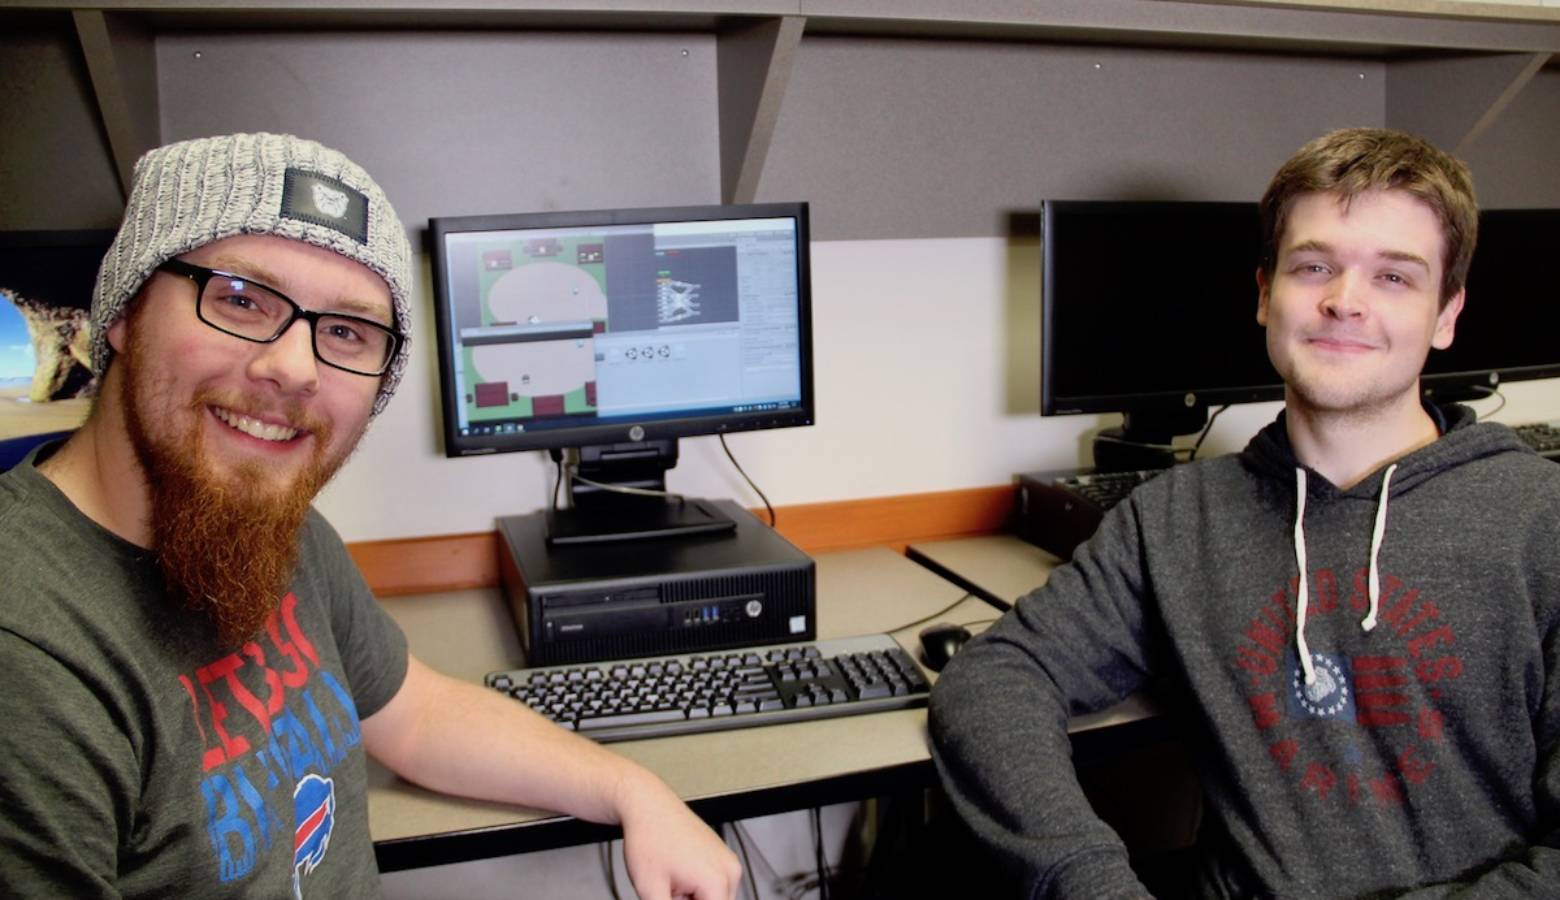 Butler University students Mathew O'Hern, left, and Parker Winters, right, are developing a video game to assist children with autism improve social skills. (Provided by Butler University)